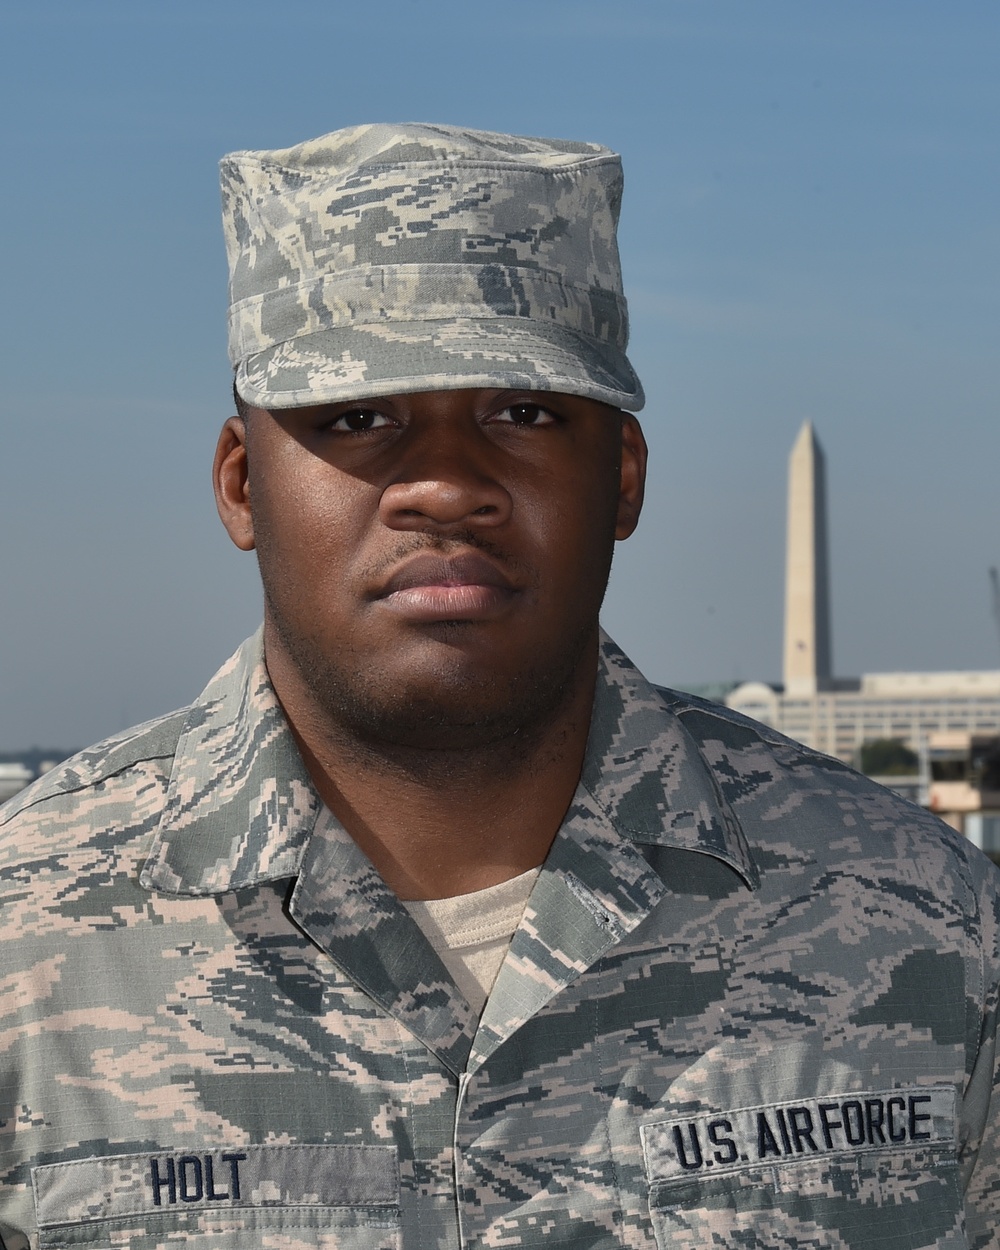 Air Force Senior Airman Holt supports the 58th Presidential Inauguration